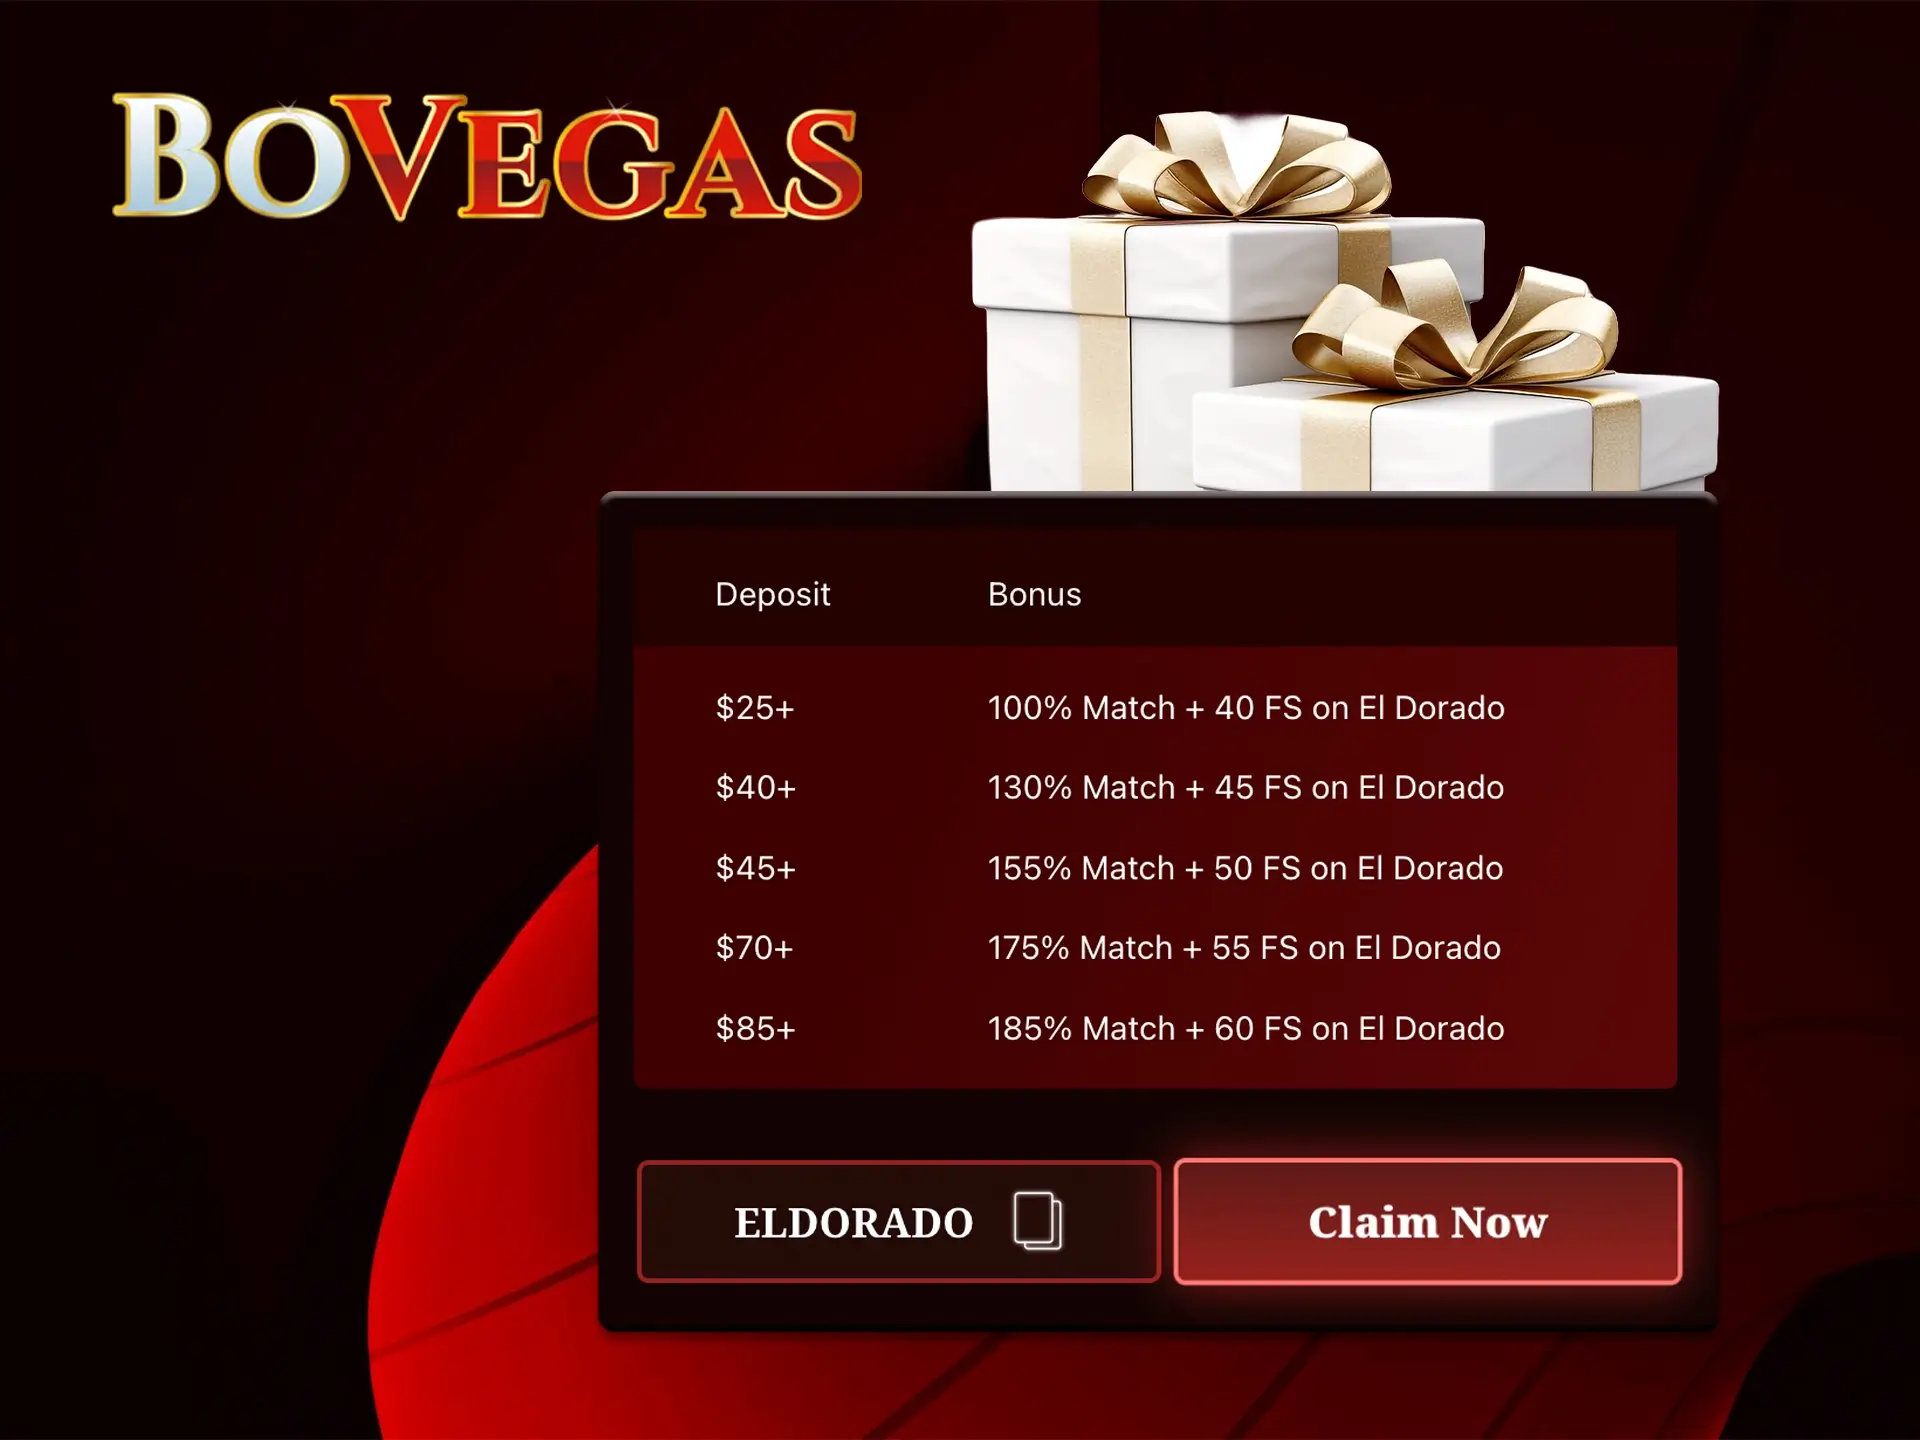 Fund your BoVegas account and get new and exciting offers from the best casino in Australia.